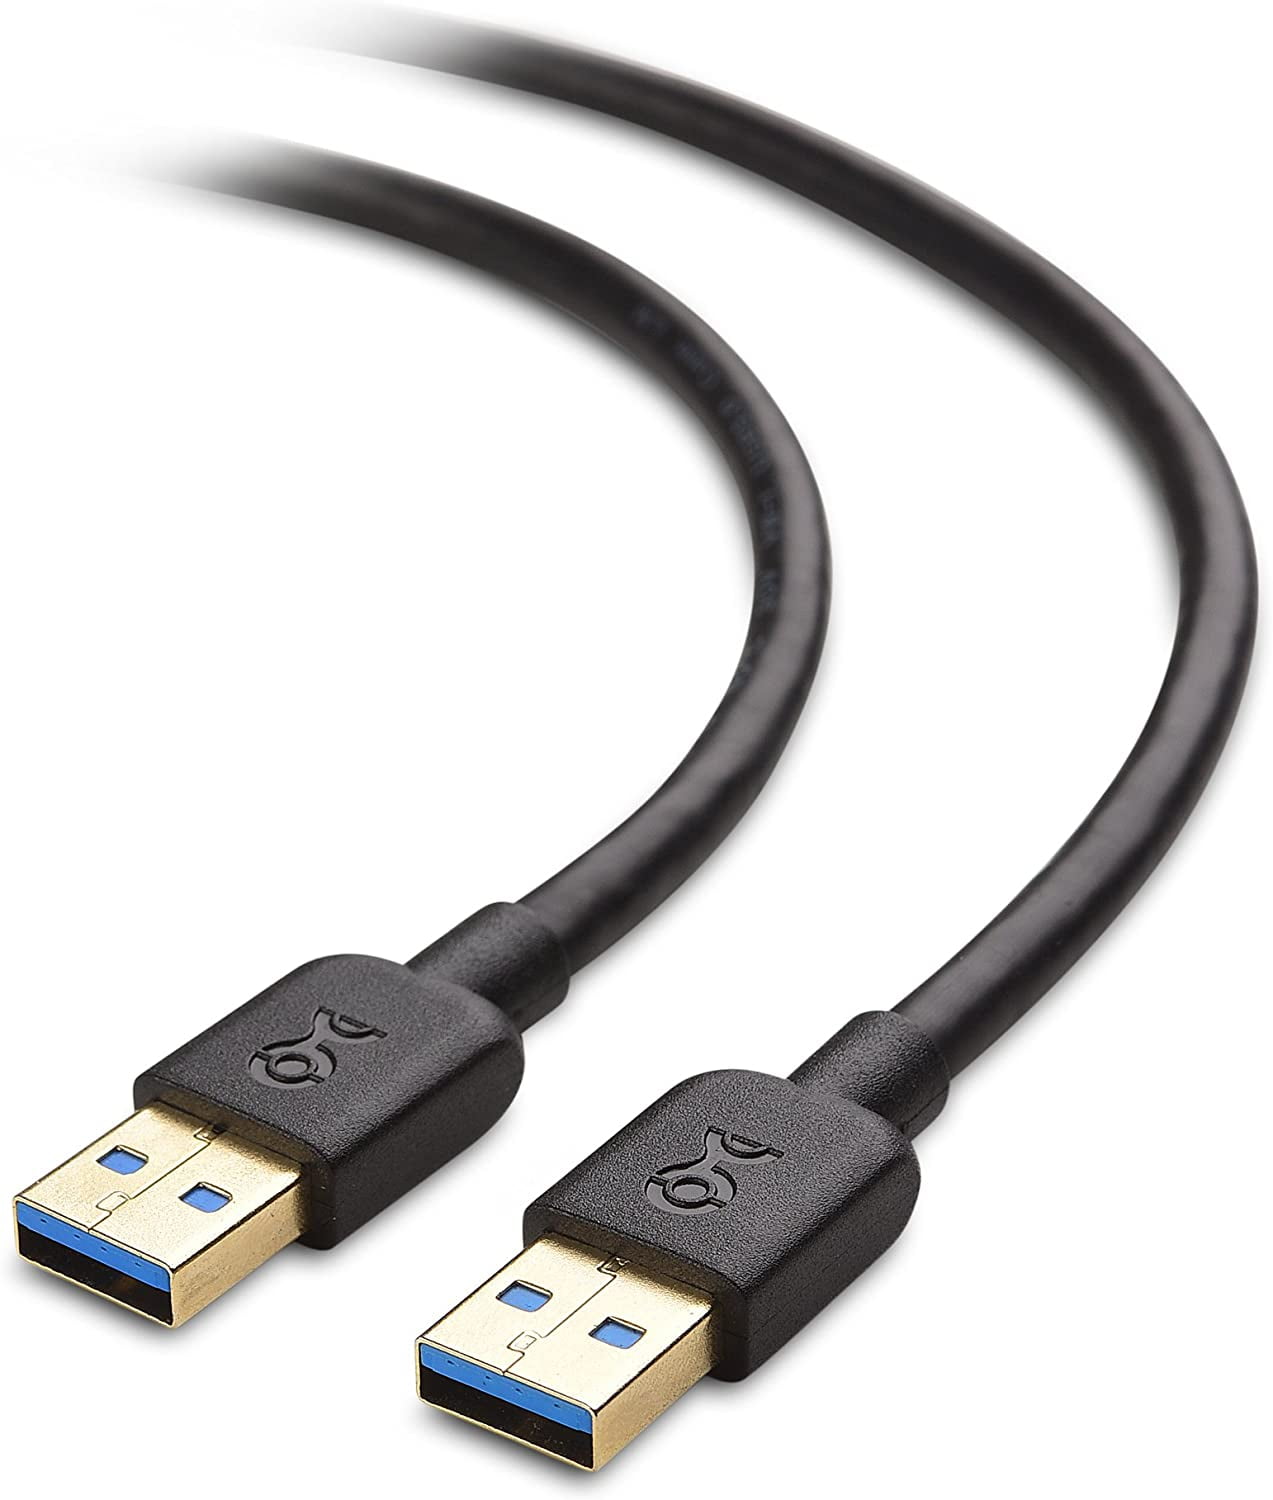 Cable Matters USB to USB Cable (USB Male to Male Cable) in Black – 6 Feet